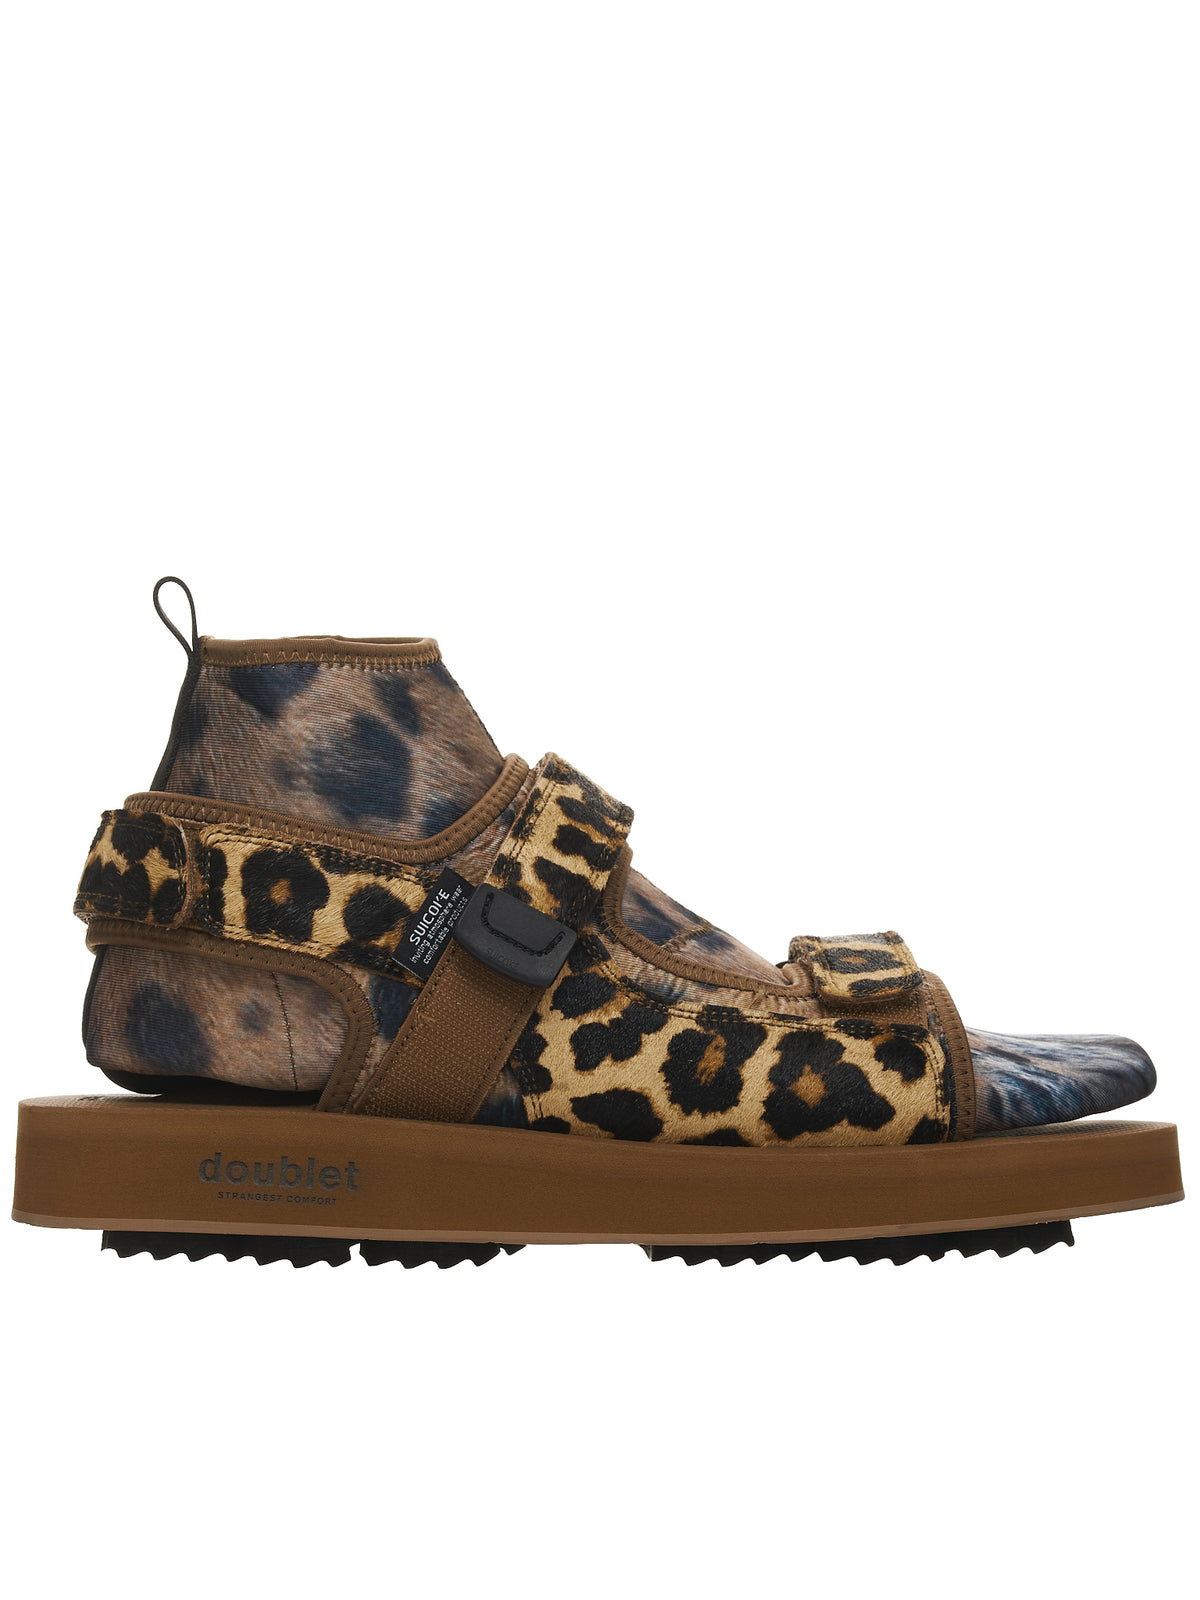 Doublet x Suicoke Animal Foot Layered Sandals | H.Lorenzo - side 1